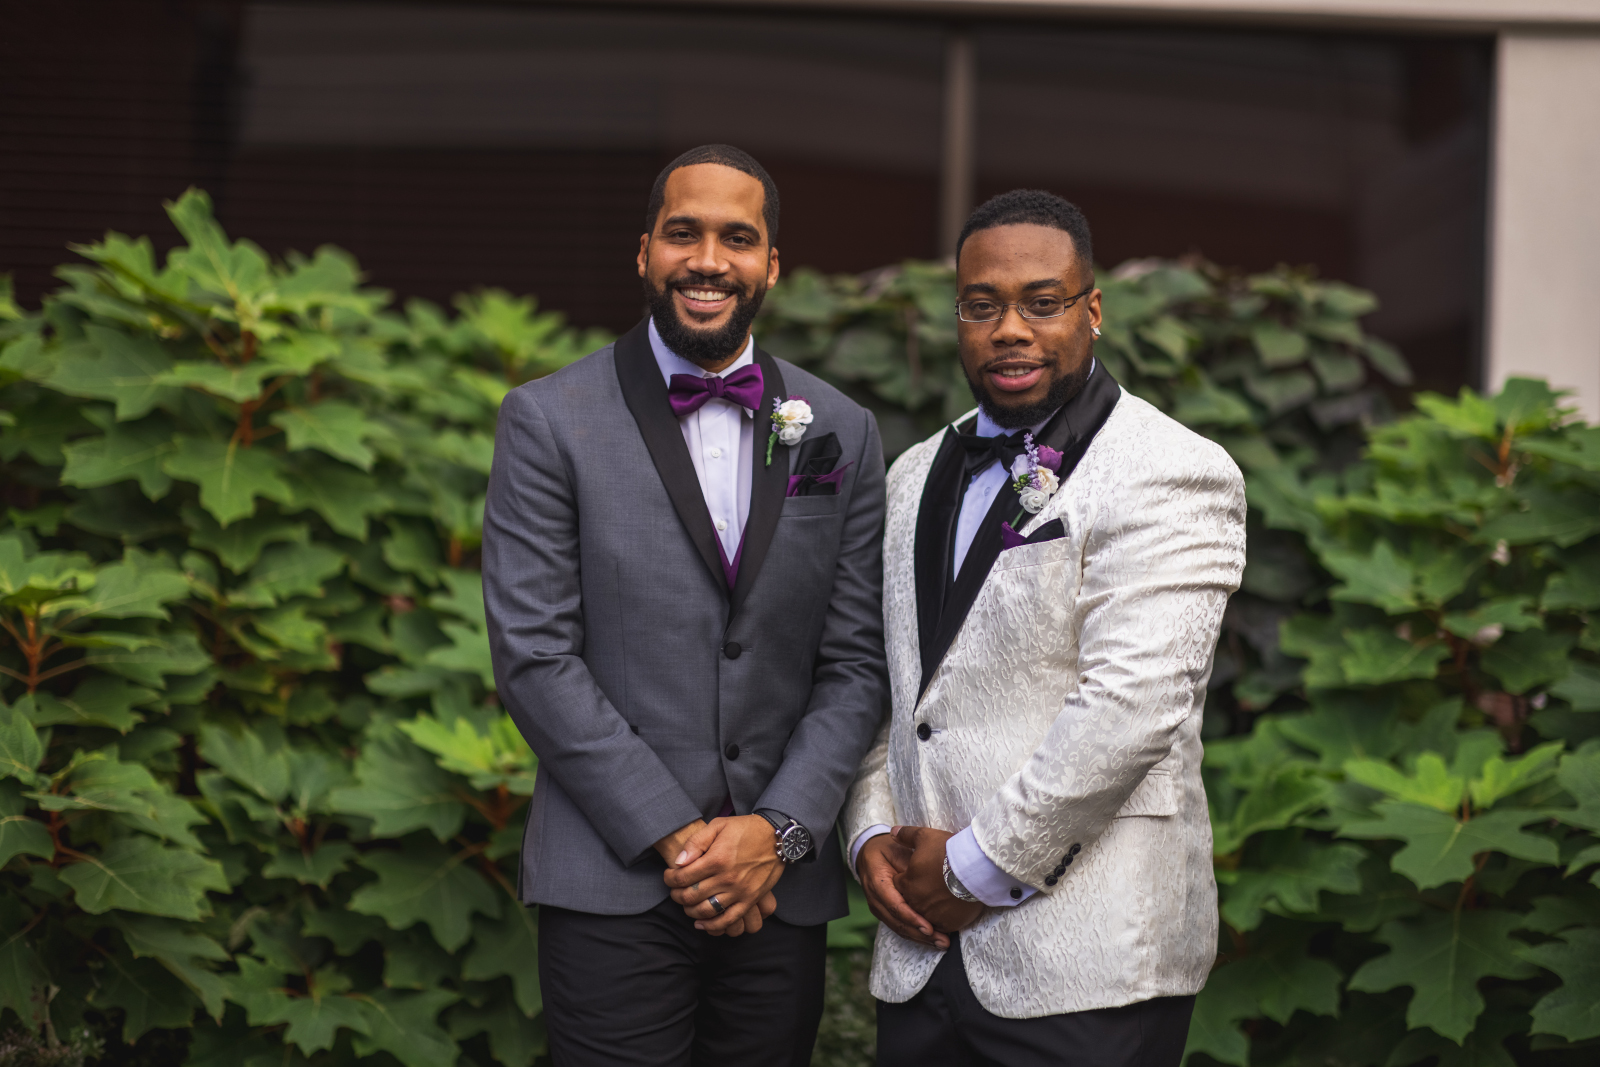 Groom with groomsman, bridal party portrait, green bushes, nature, African American groom, African American wedding, romantic wedding ceremony at Hilton Akron/Fairlawn